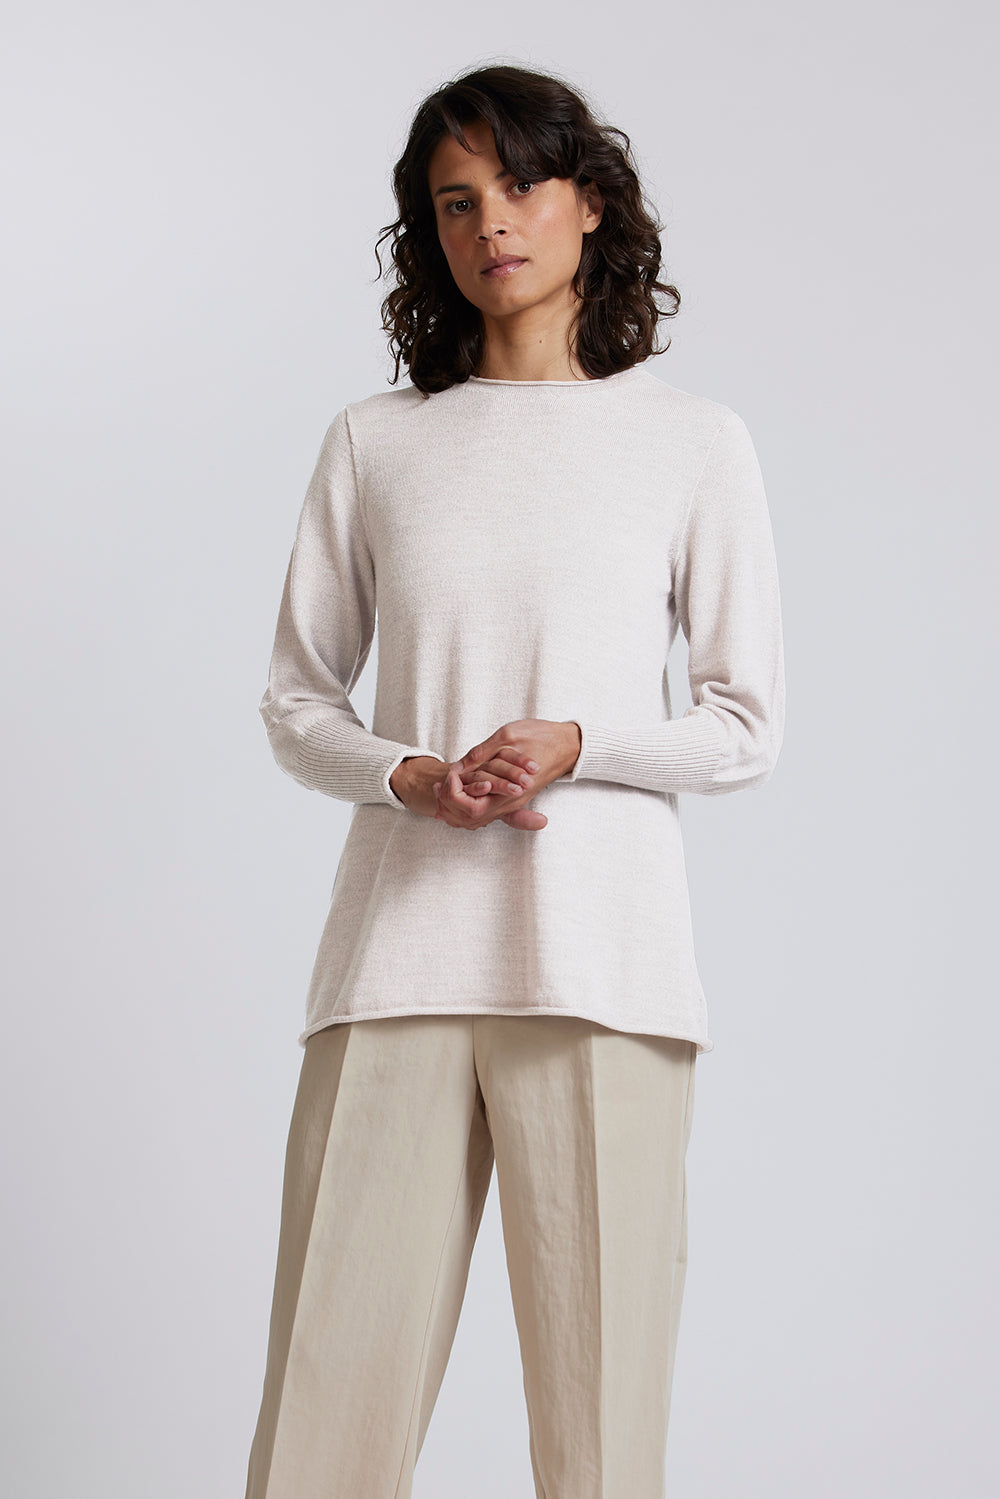 A-Line Crew Neck Sweater in Natural by Royal Merino